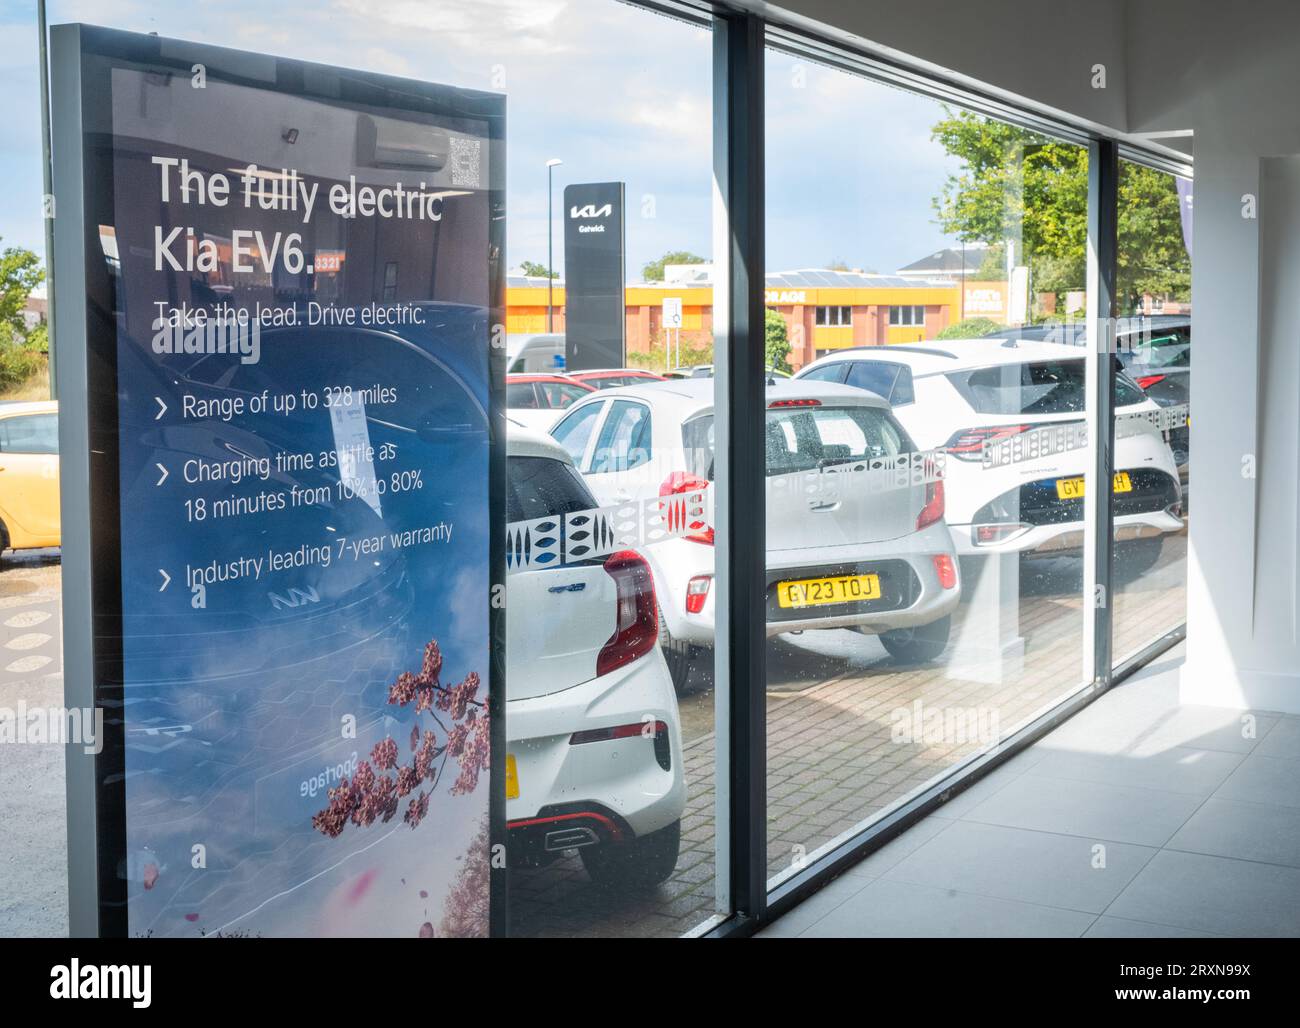 A sign inside a Kia car dealership in Crawley, UK, advertising the fully electric Kia EV6. Outside the windown Kia petrol cars are lined up for sale. Stock Photo